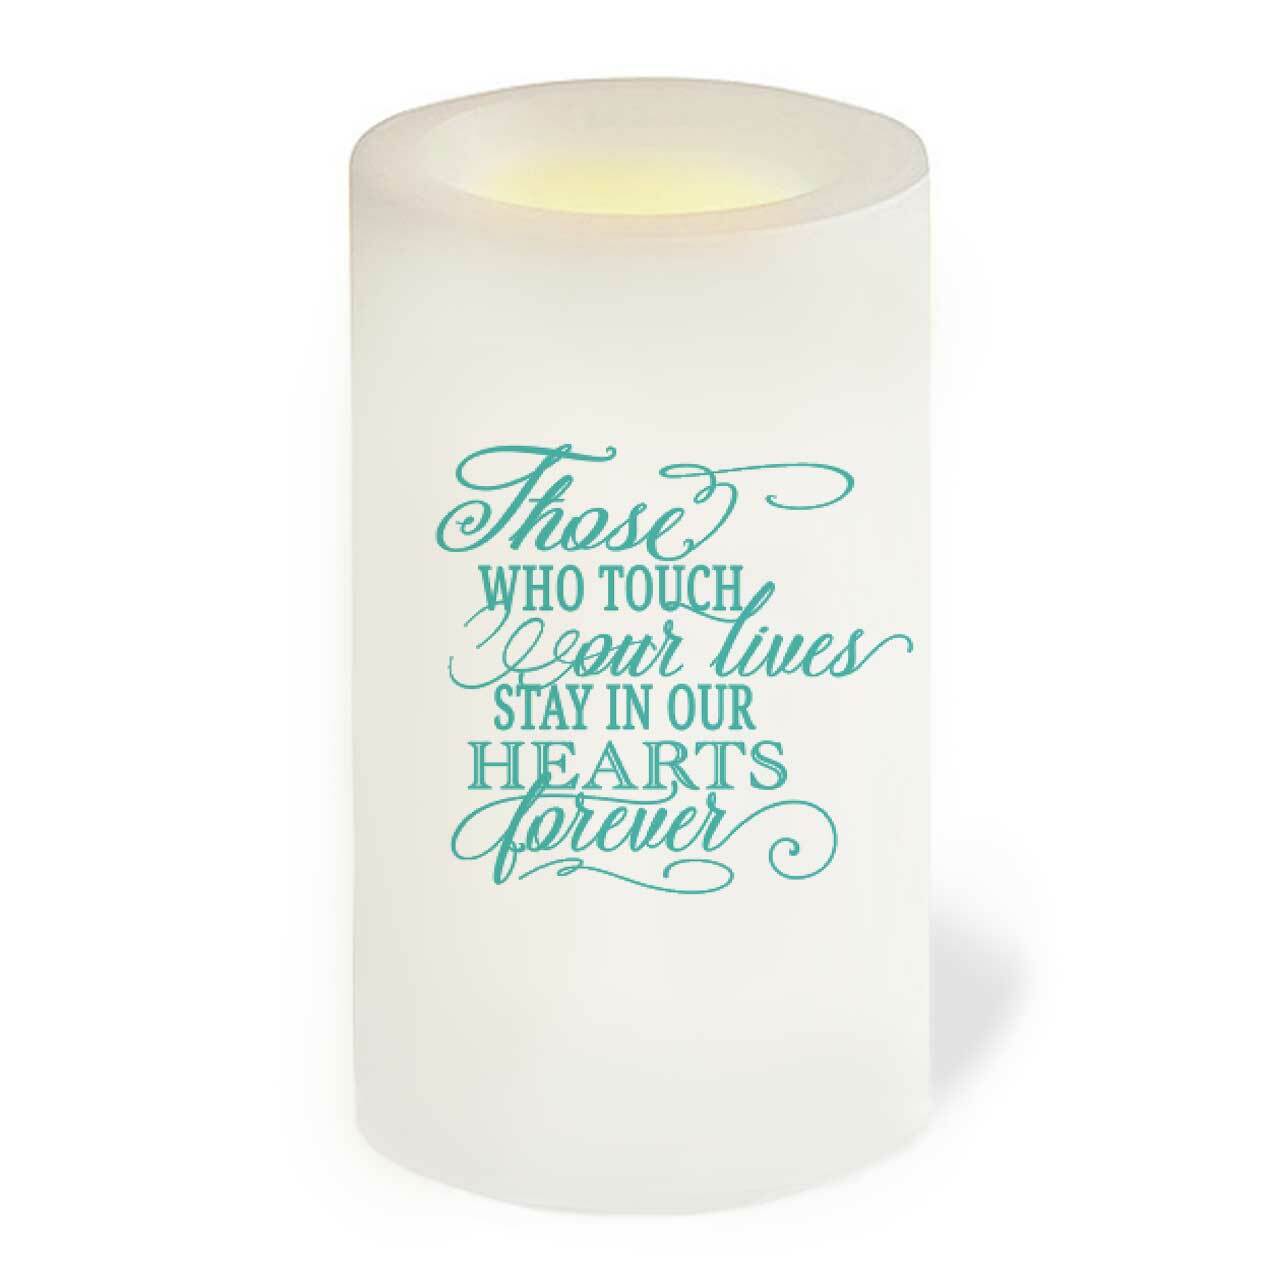 Butterfly Florals Personalized Flameless LED Memorial Candle.